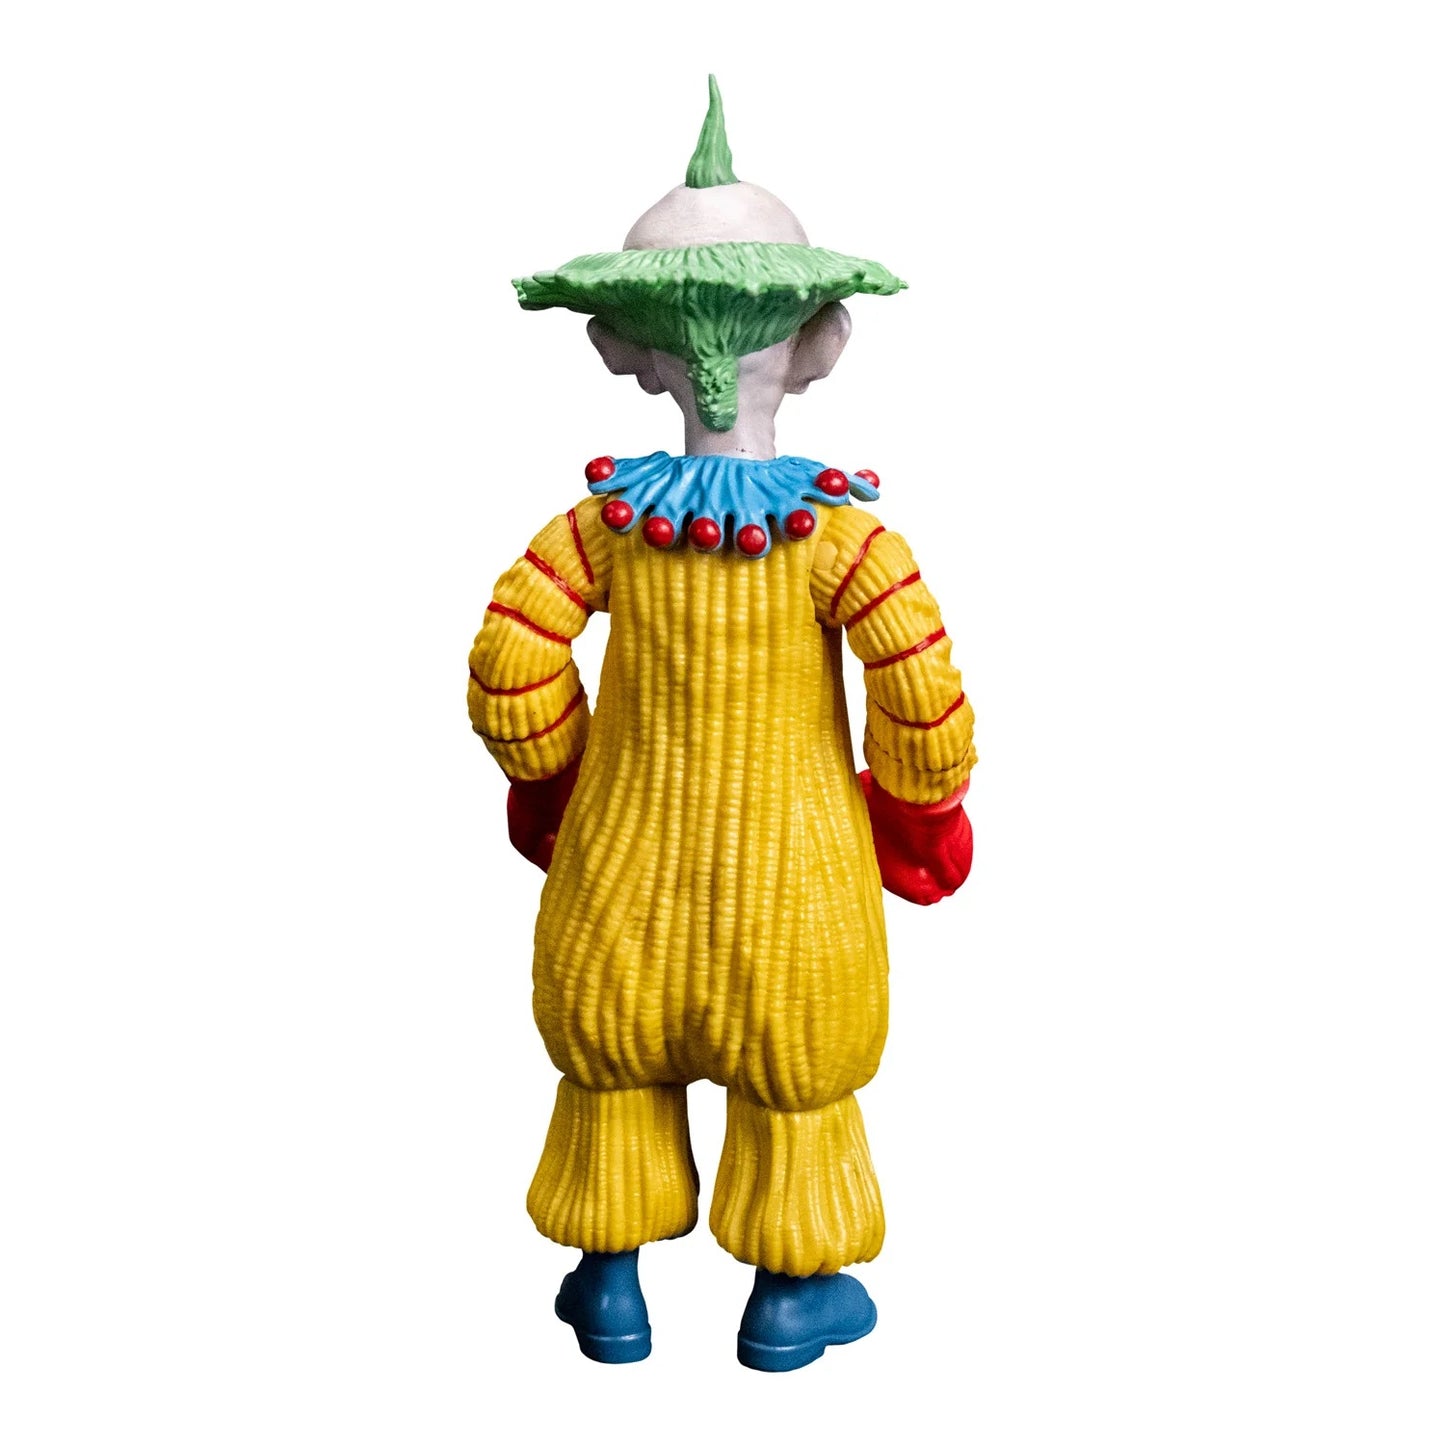 KILLER KLOWNS FROM OUTER SPACE - Shorty Trick Or Treat Studios Figure